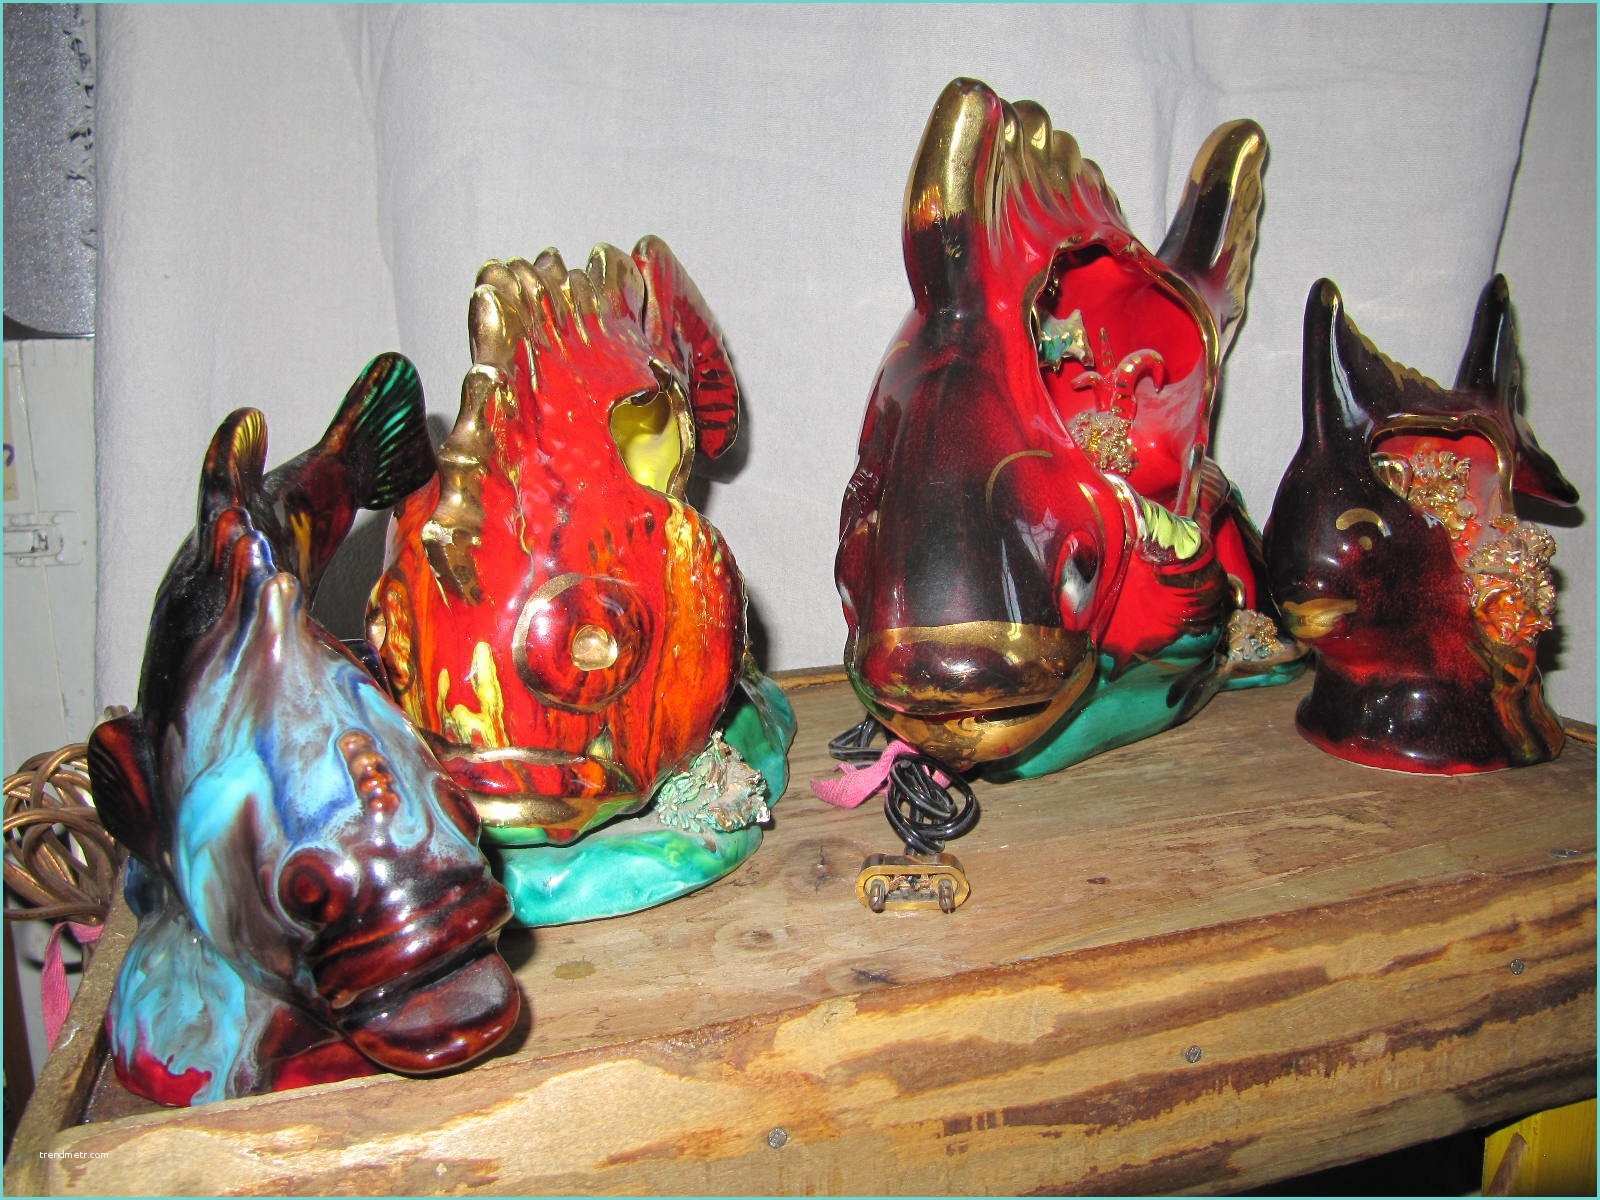 Lampe Poisson Vallauris CÉramique Poterie · Mes Collections ordo Ab Chao